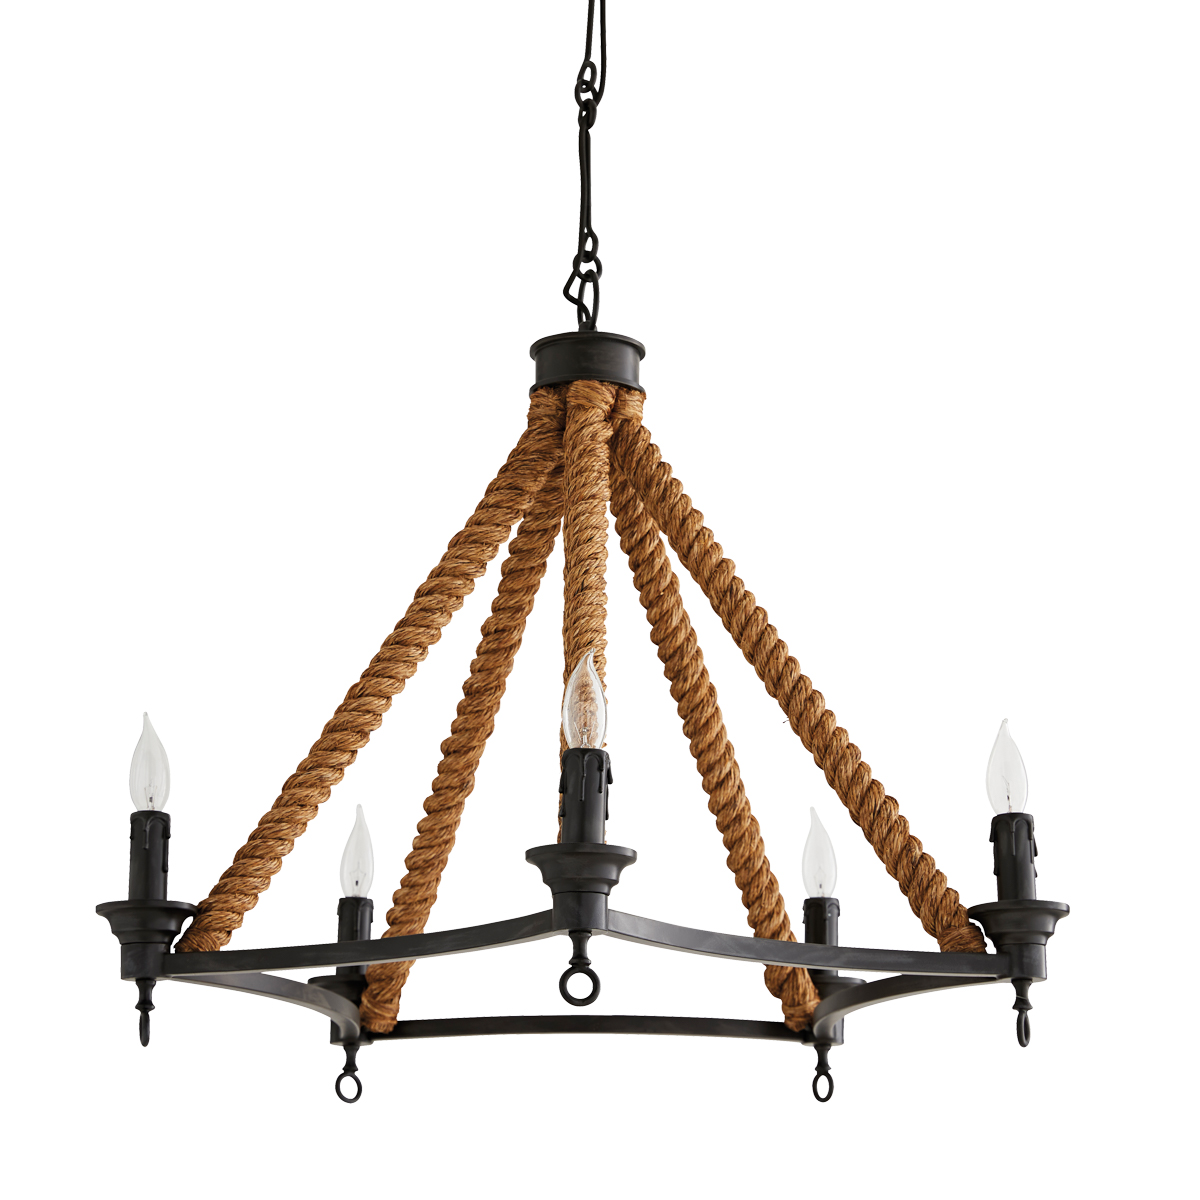 The Johyo Chandelier is made of handwoven rope.